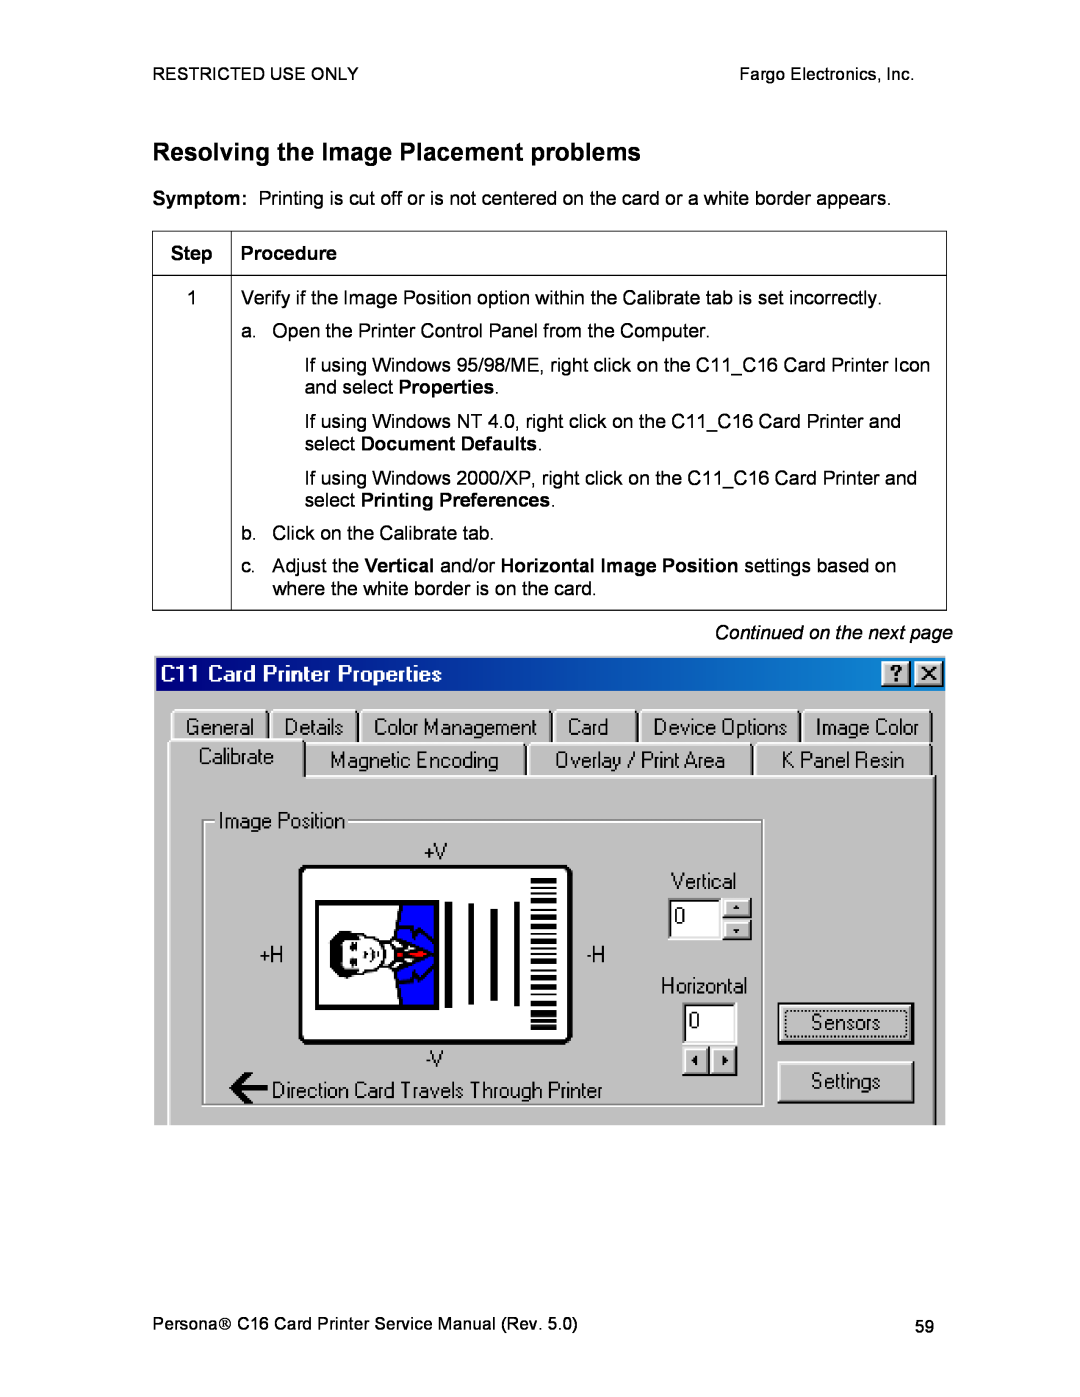 FARGO electronic C16 service manual Resolving the Image Placement problems, Step Procedure, Continued on the next page 